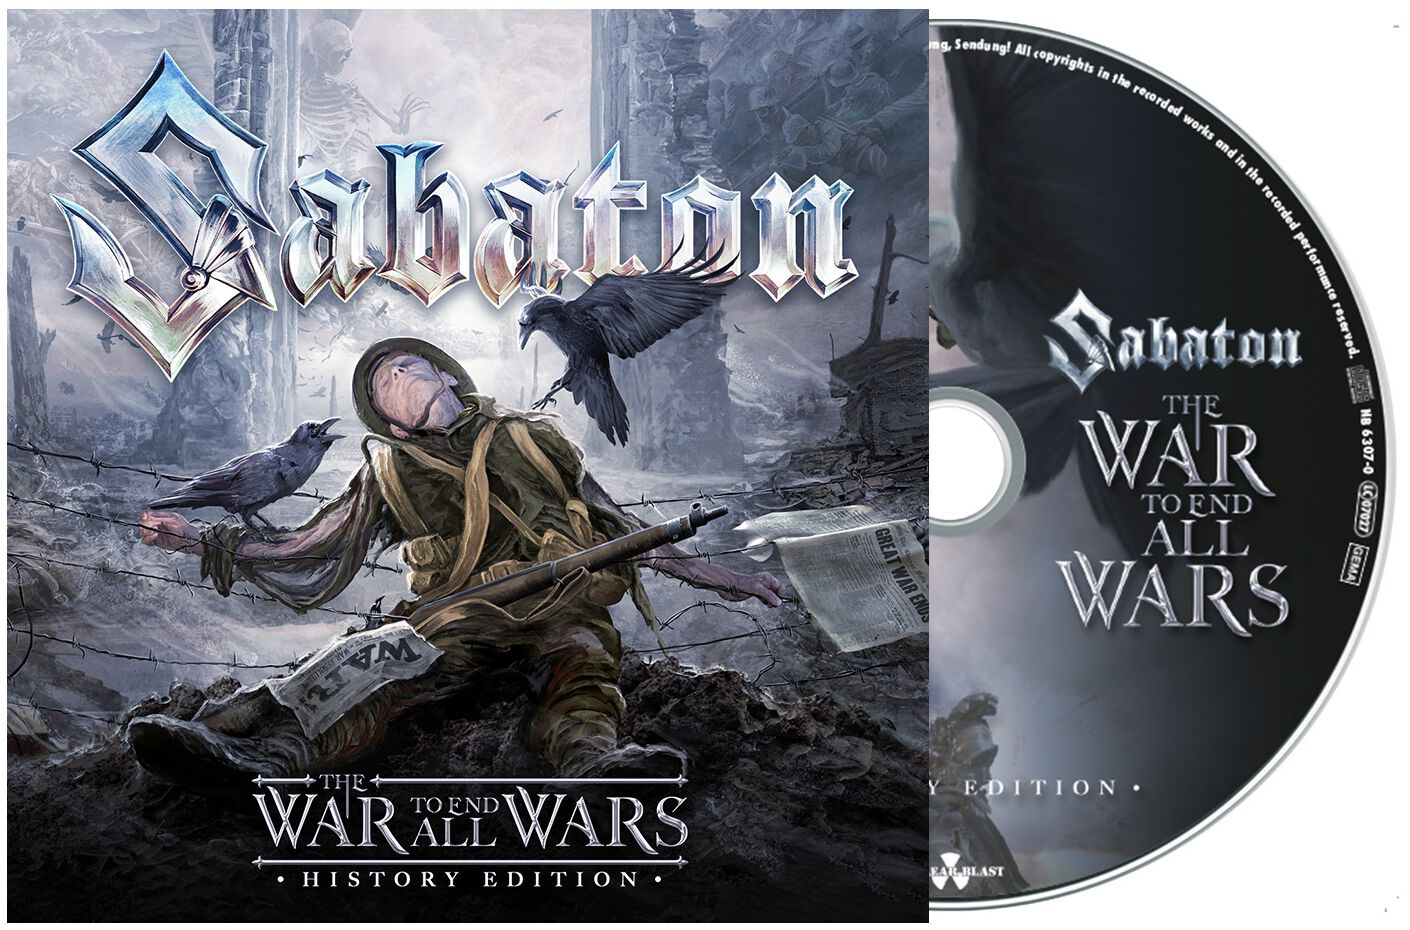 Sabaton The war to end all wars (History Edition) CD multicolor